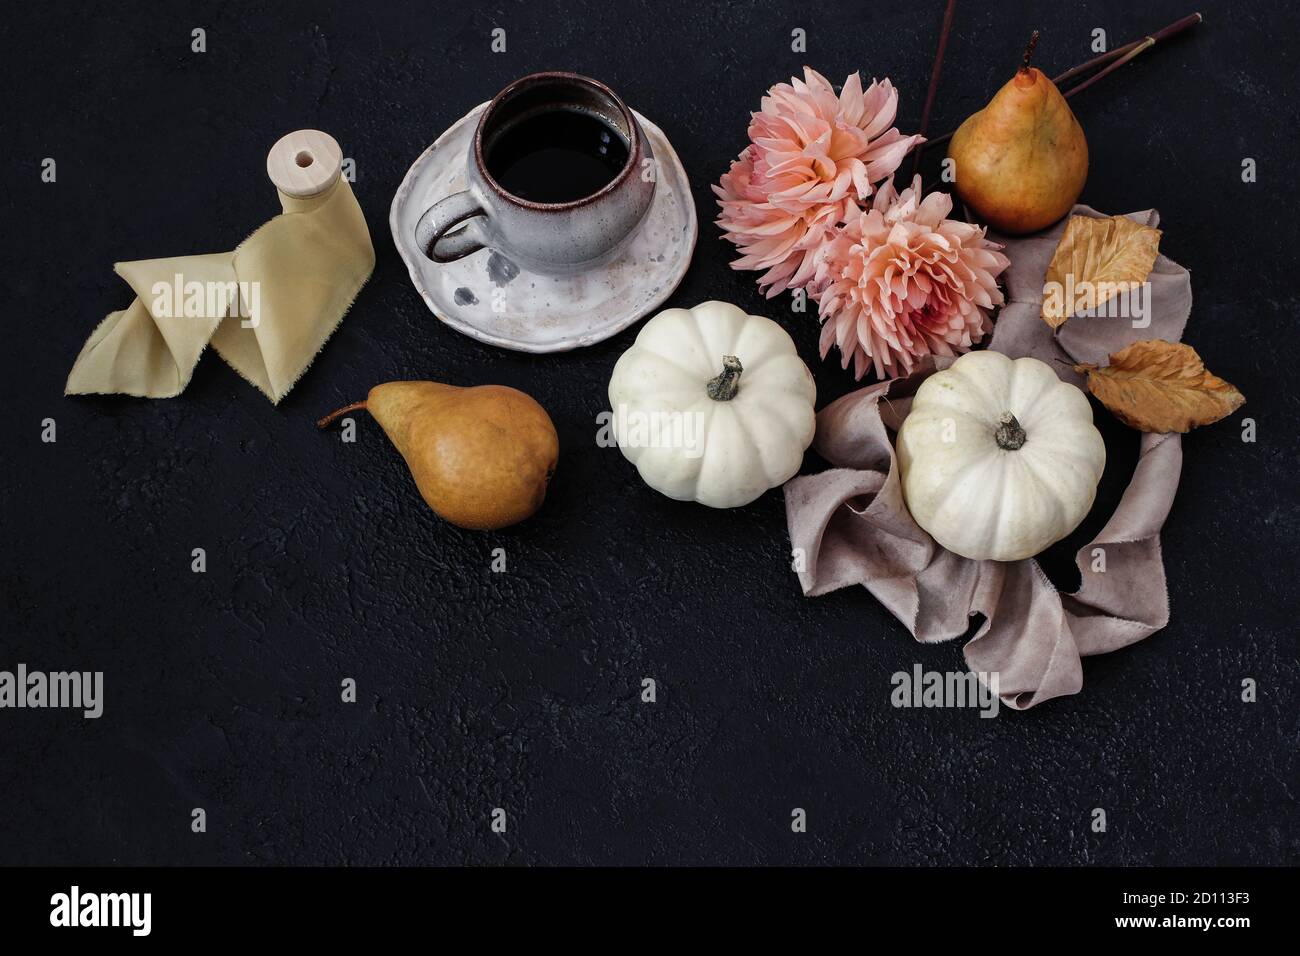 Autumn still life composition. Cup of coffee, pear fruit and white pumpkins with pink dahlia flowers on black table background. Moody fall Stock Photo